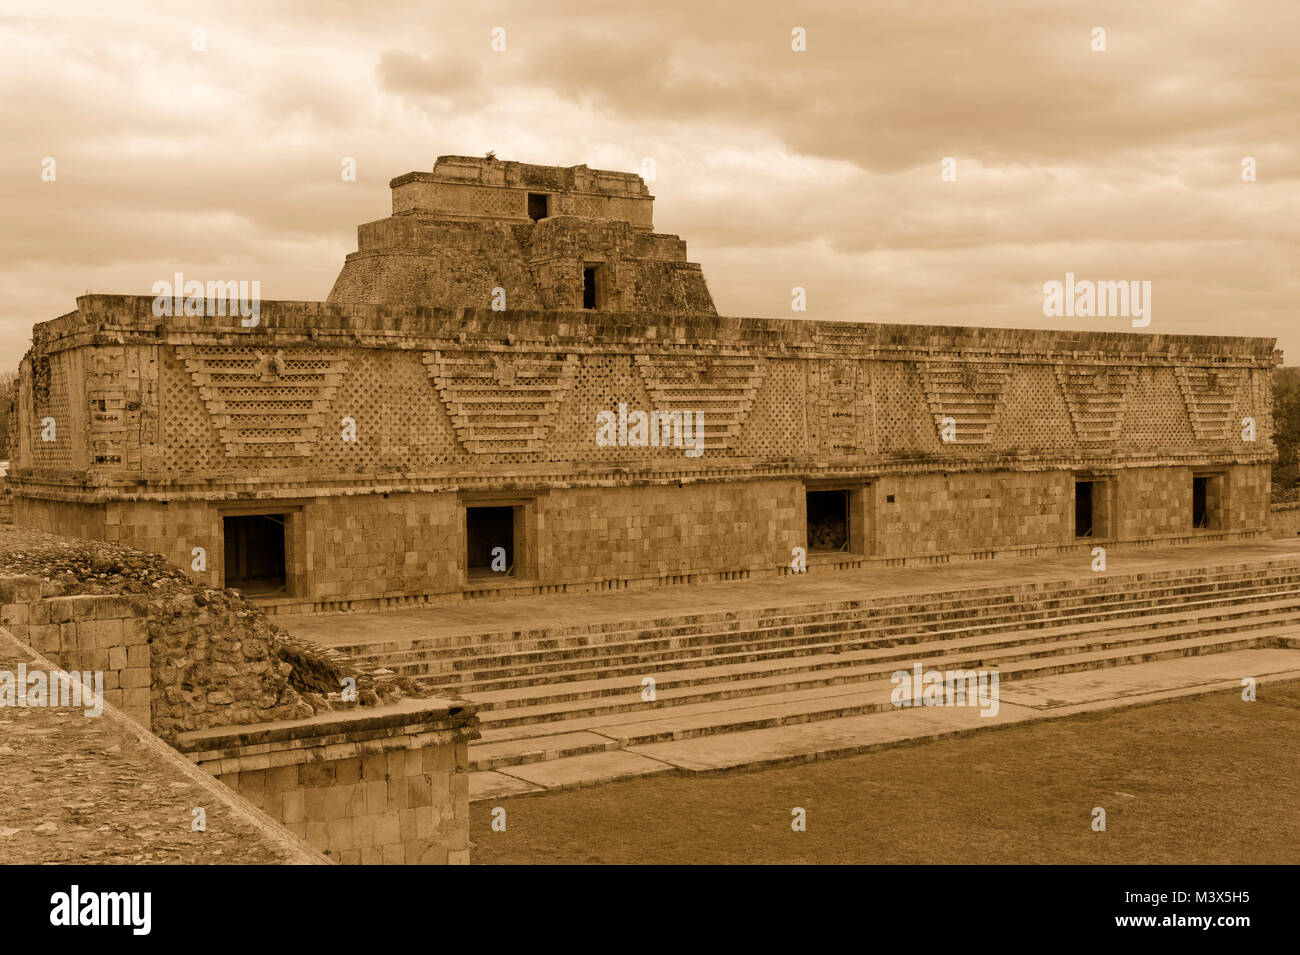 Sepia tone east building of the Nunnery Quadrangle with Pyramid of the Magician at the Mayan ruins of  Uxmal, Yucatan, Mexico Stock Photo